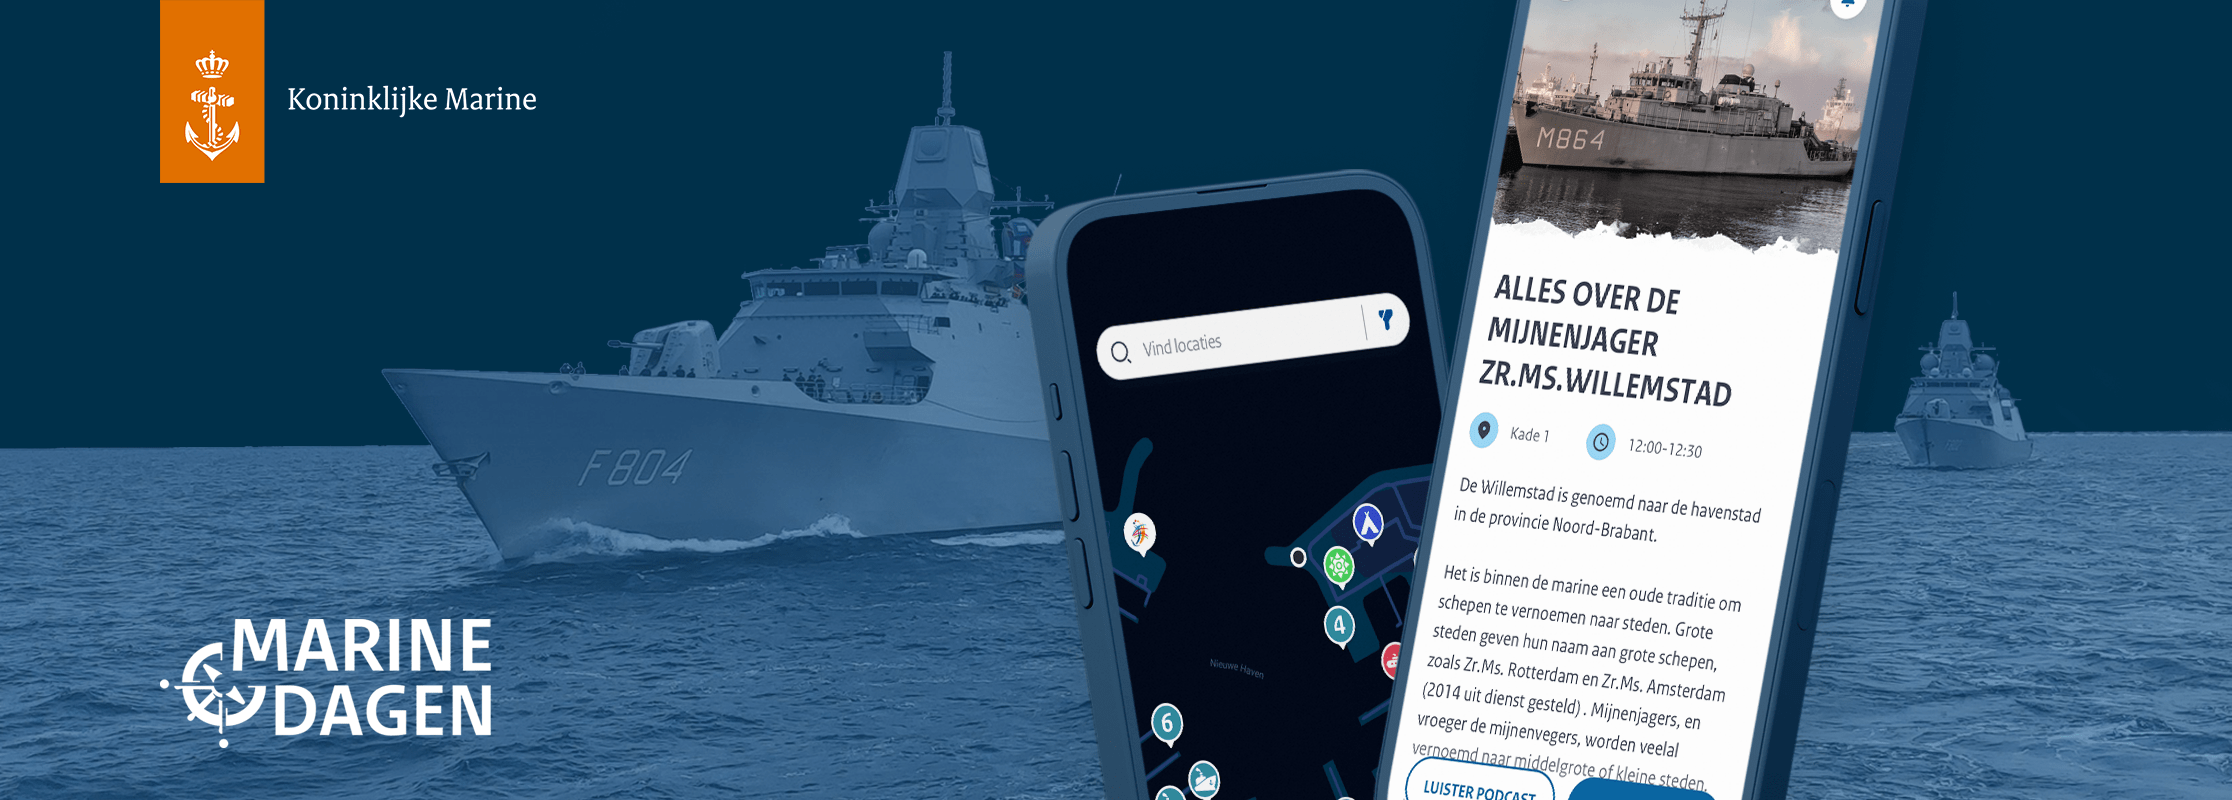 The Royal Navy Days: event app full of news and experiences